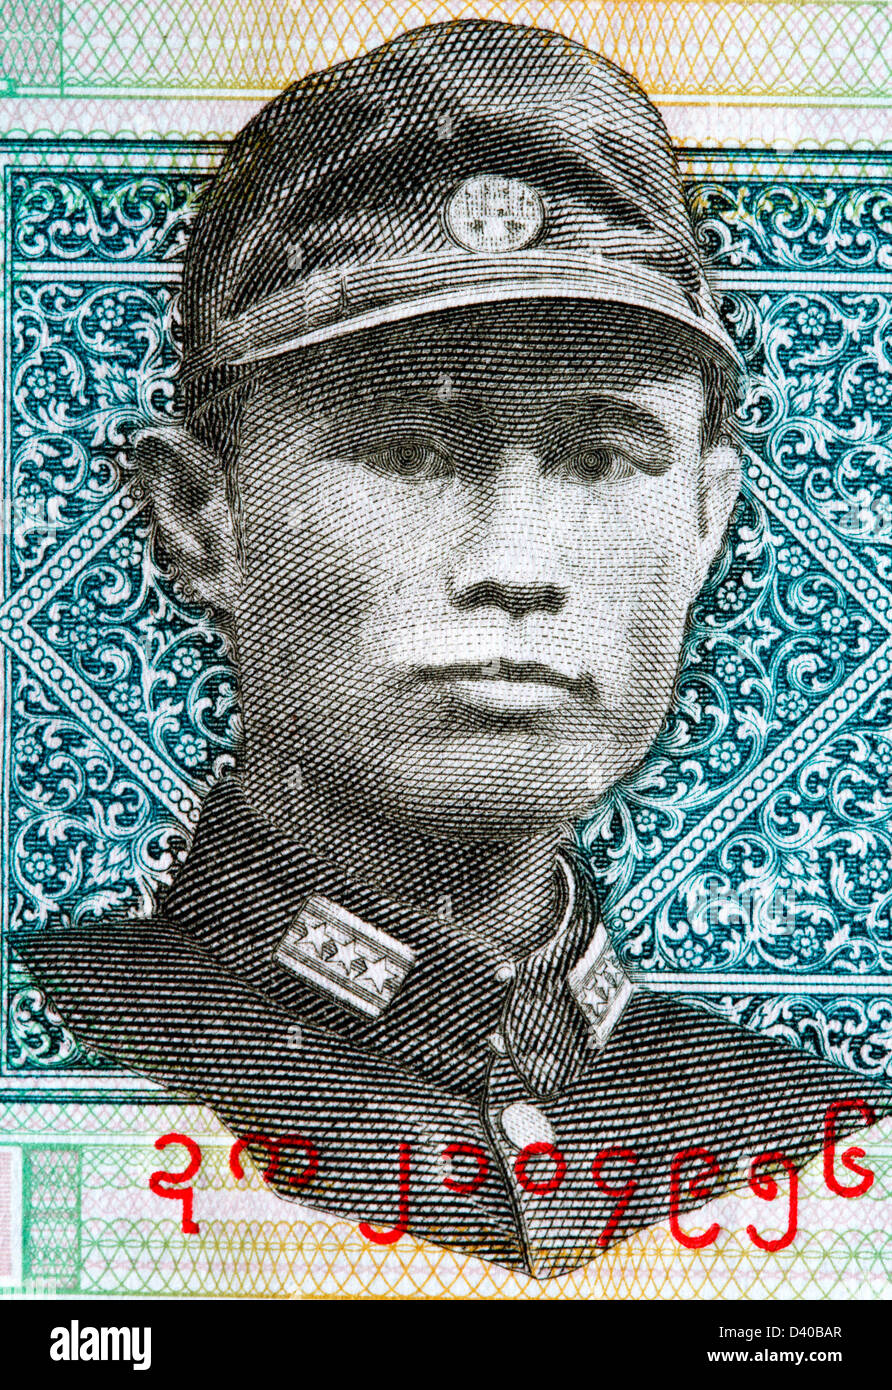 Portrait of General Aung San from 1 Kyat banknote, Burma, 1972 Stock Photo